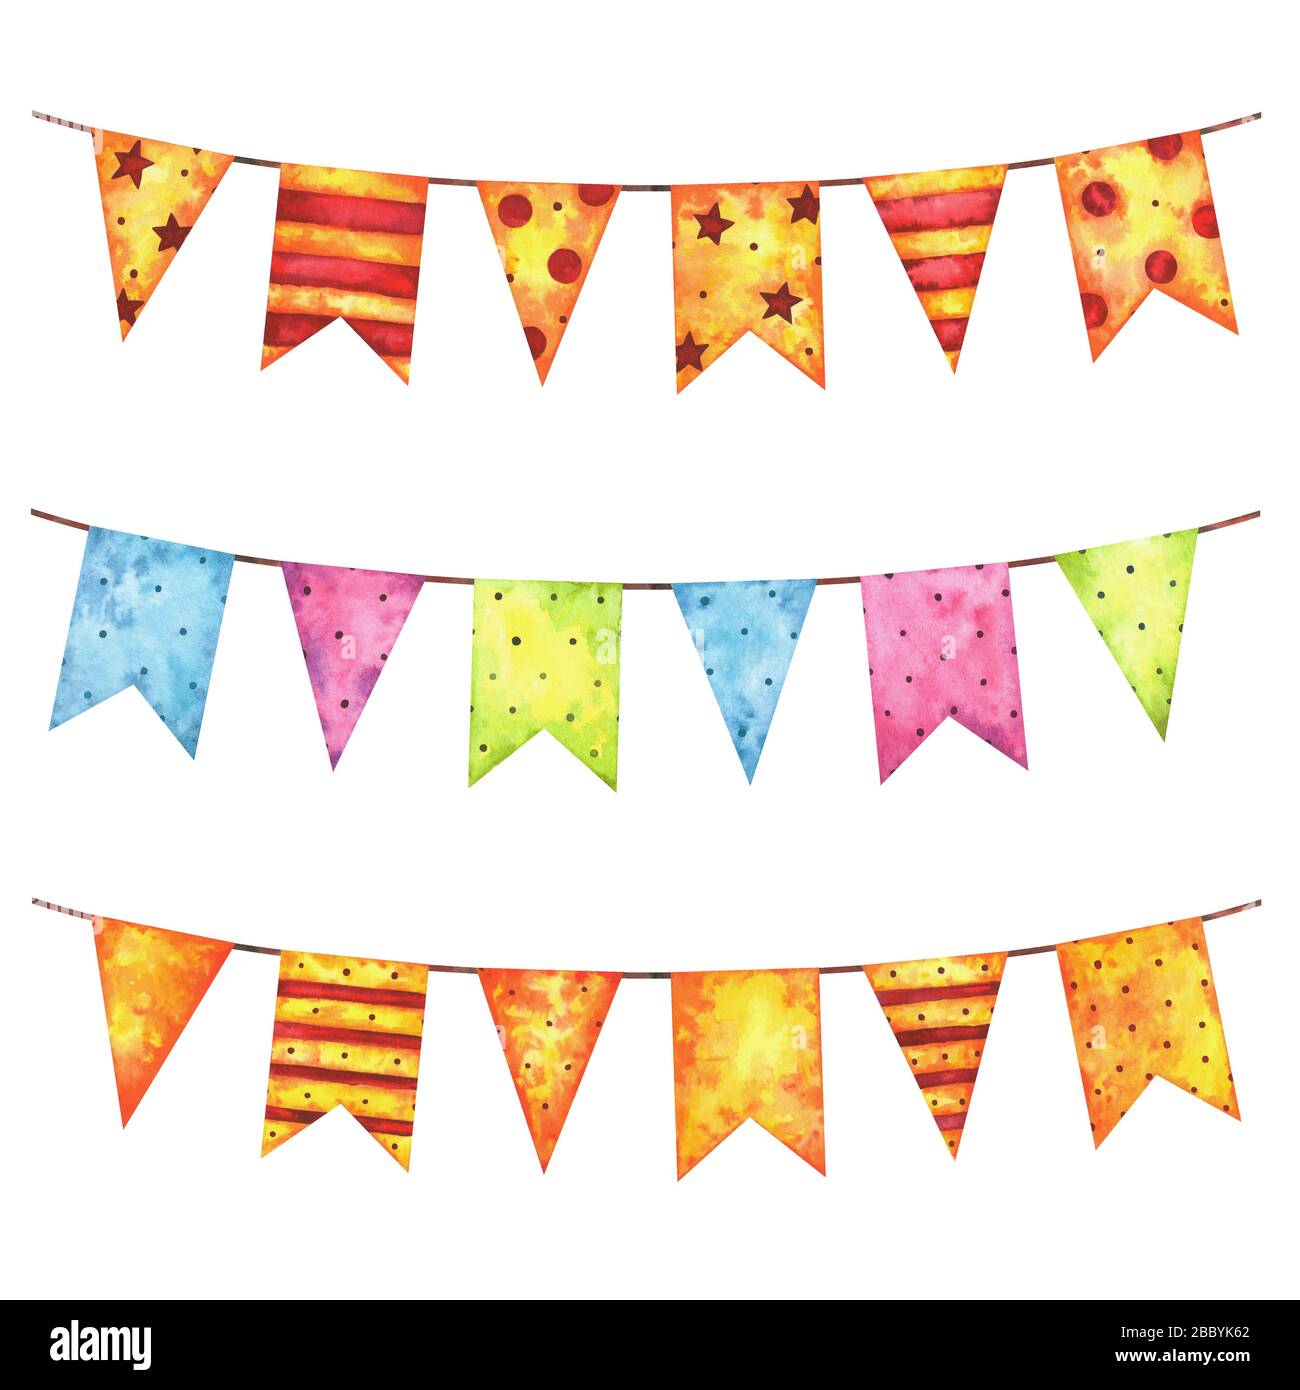 Hand painted watercolor festive garlands Stock Photo